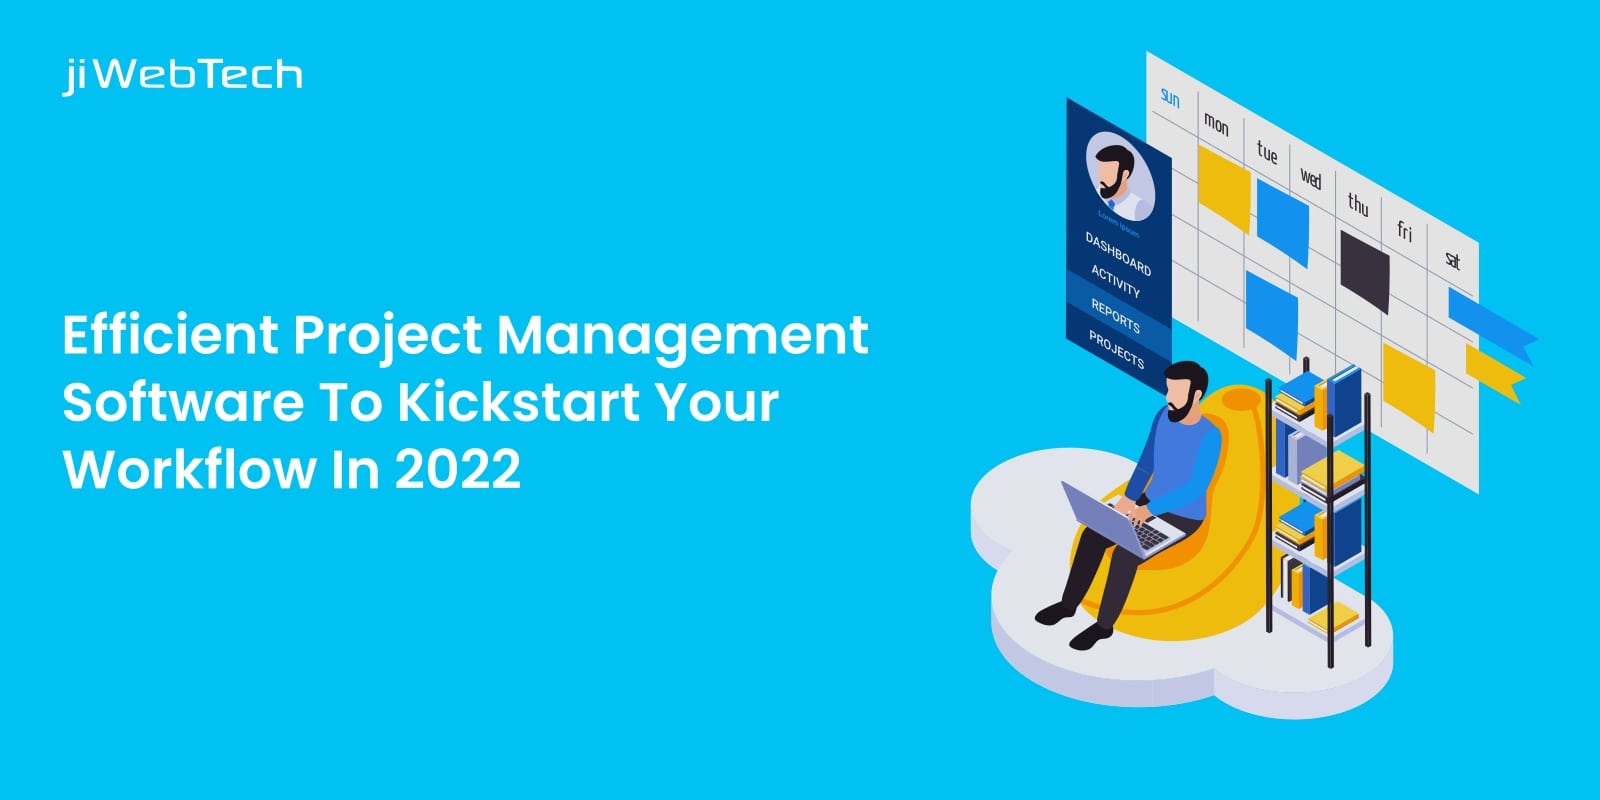 Efficient Project Management Software To Kick-start Your Workflow In 2022